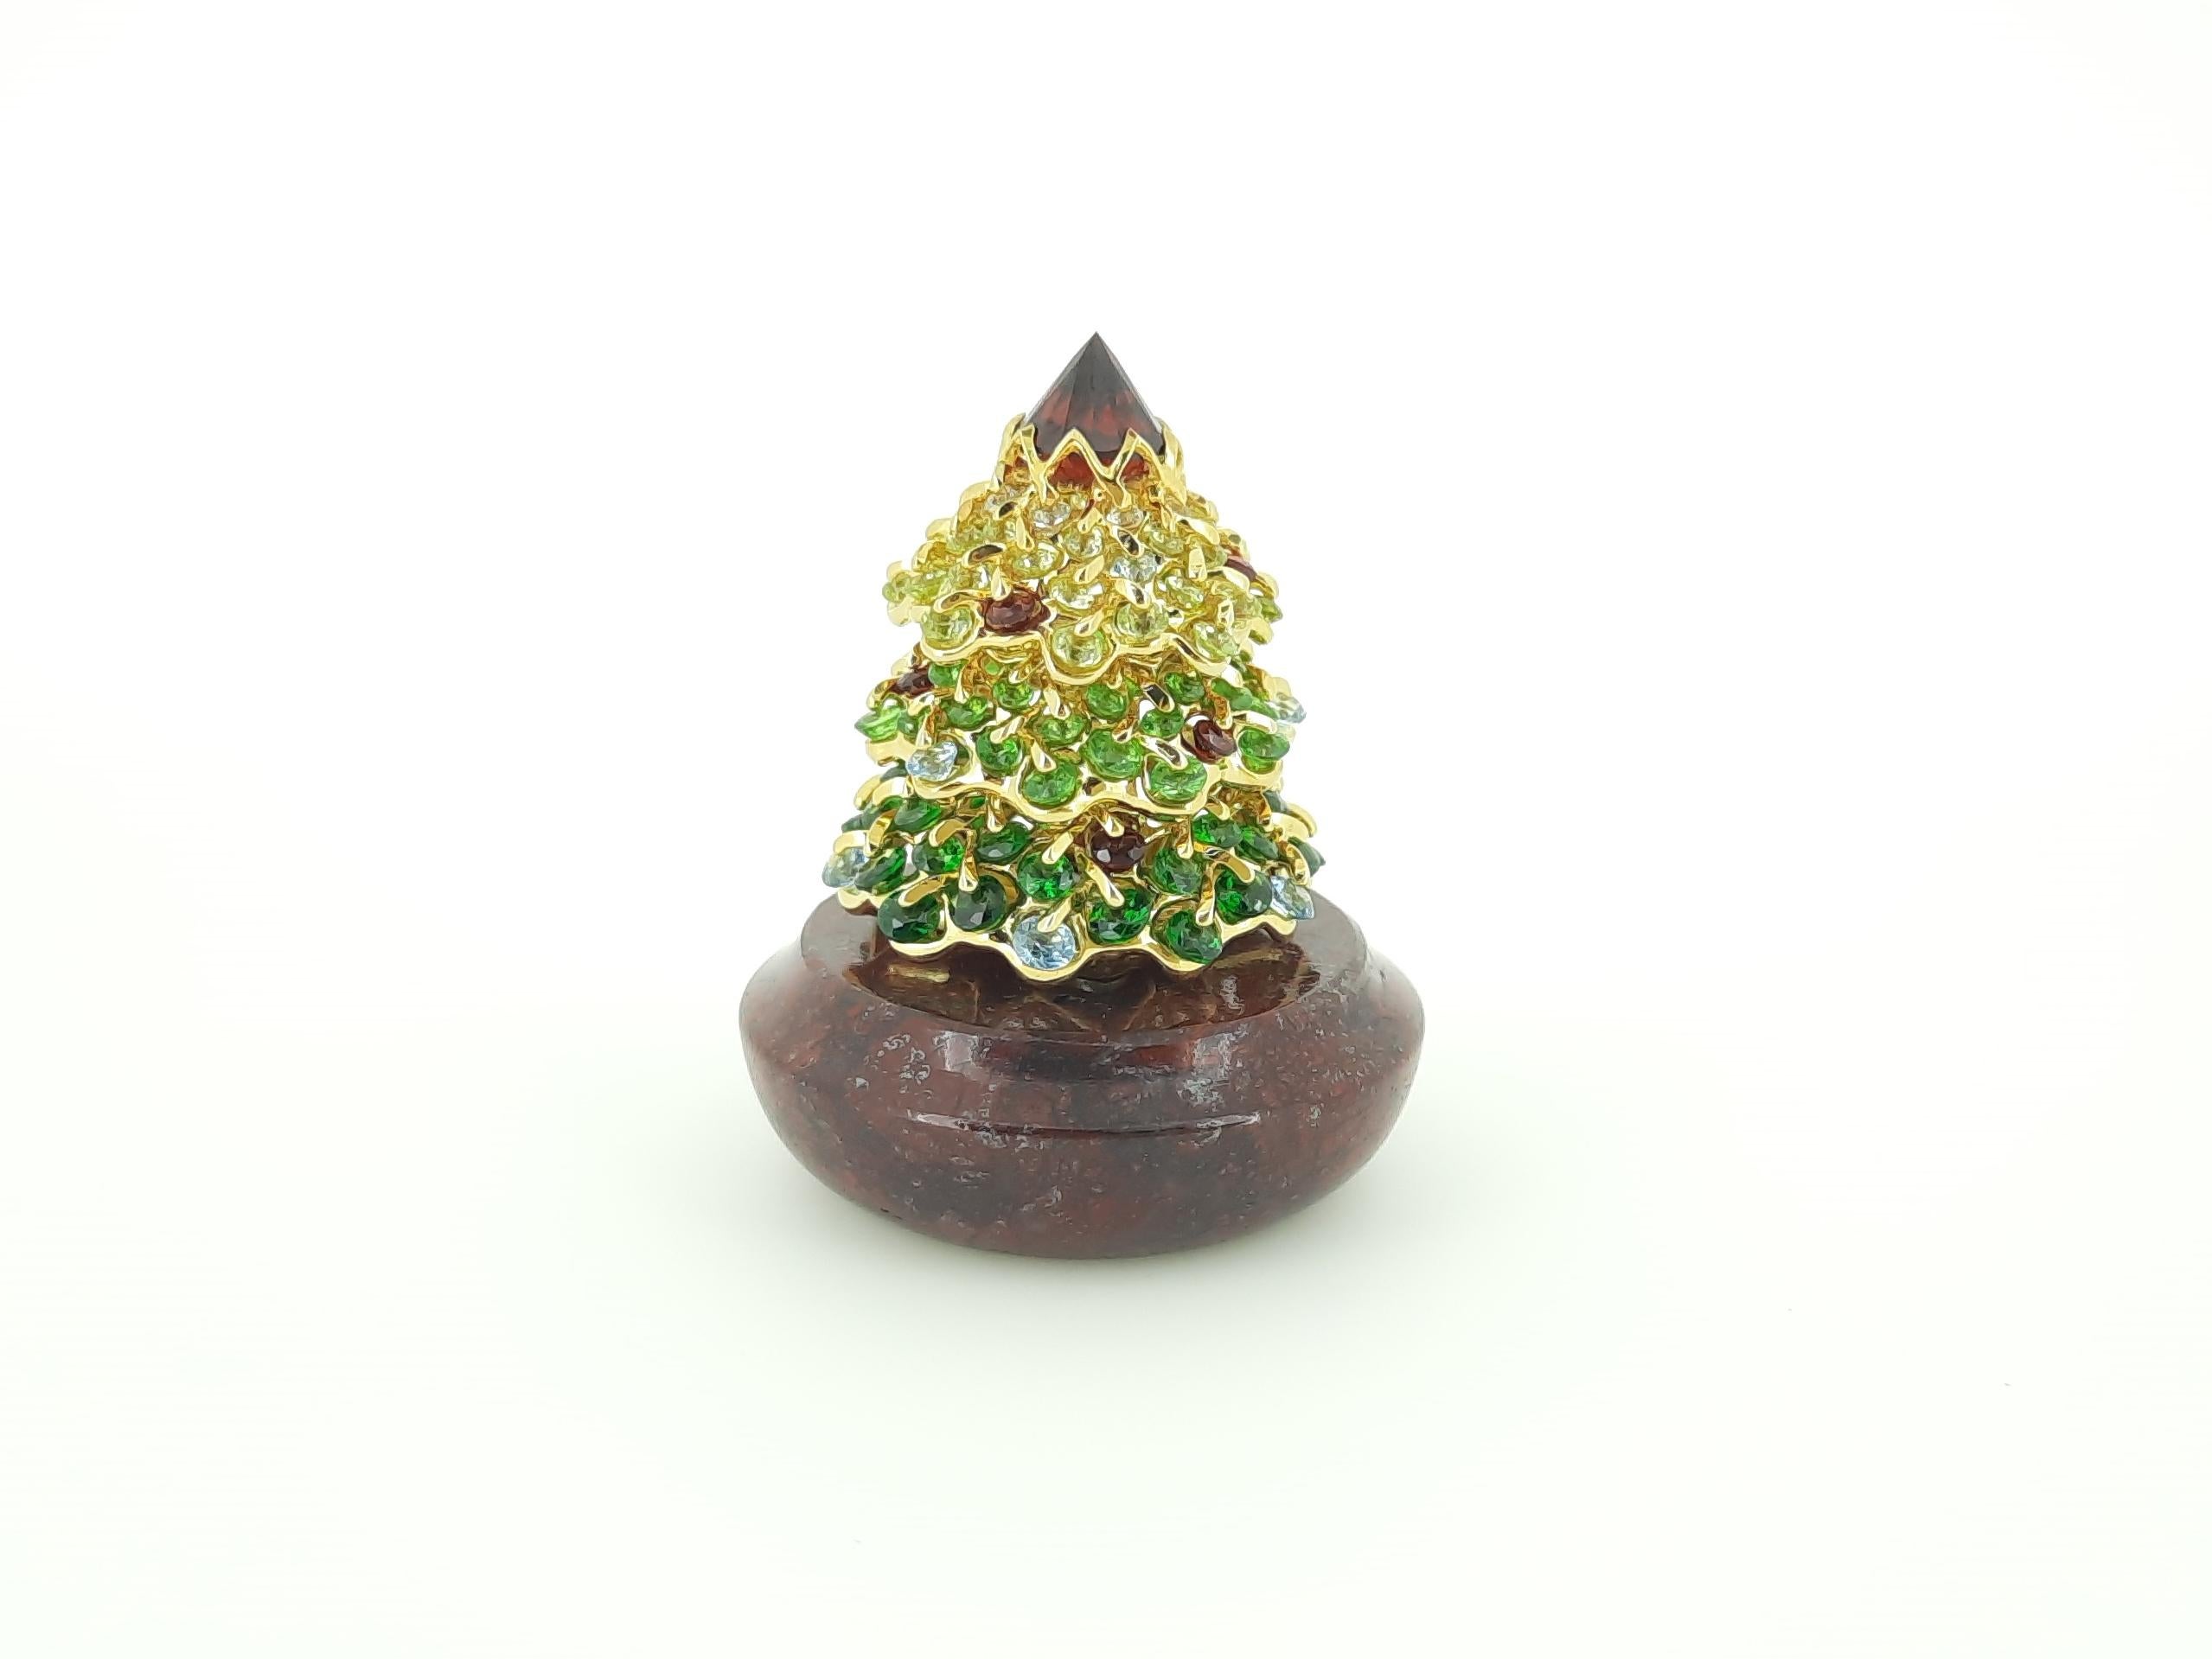 MOISEIKIN's Jewel Christmas Tree—a mesmerizing celebration crafted for the season of joy. This exquisite tree, silver gold-plated to perfection, stands as a refined desk accessory adorned with a magnetic base, ingeniously fashioned as a paper